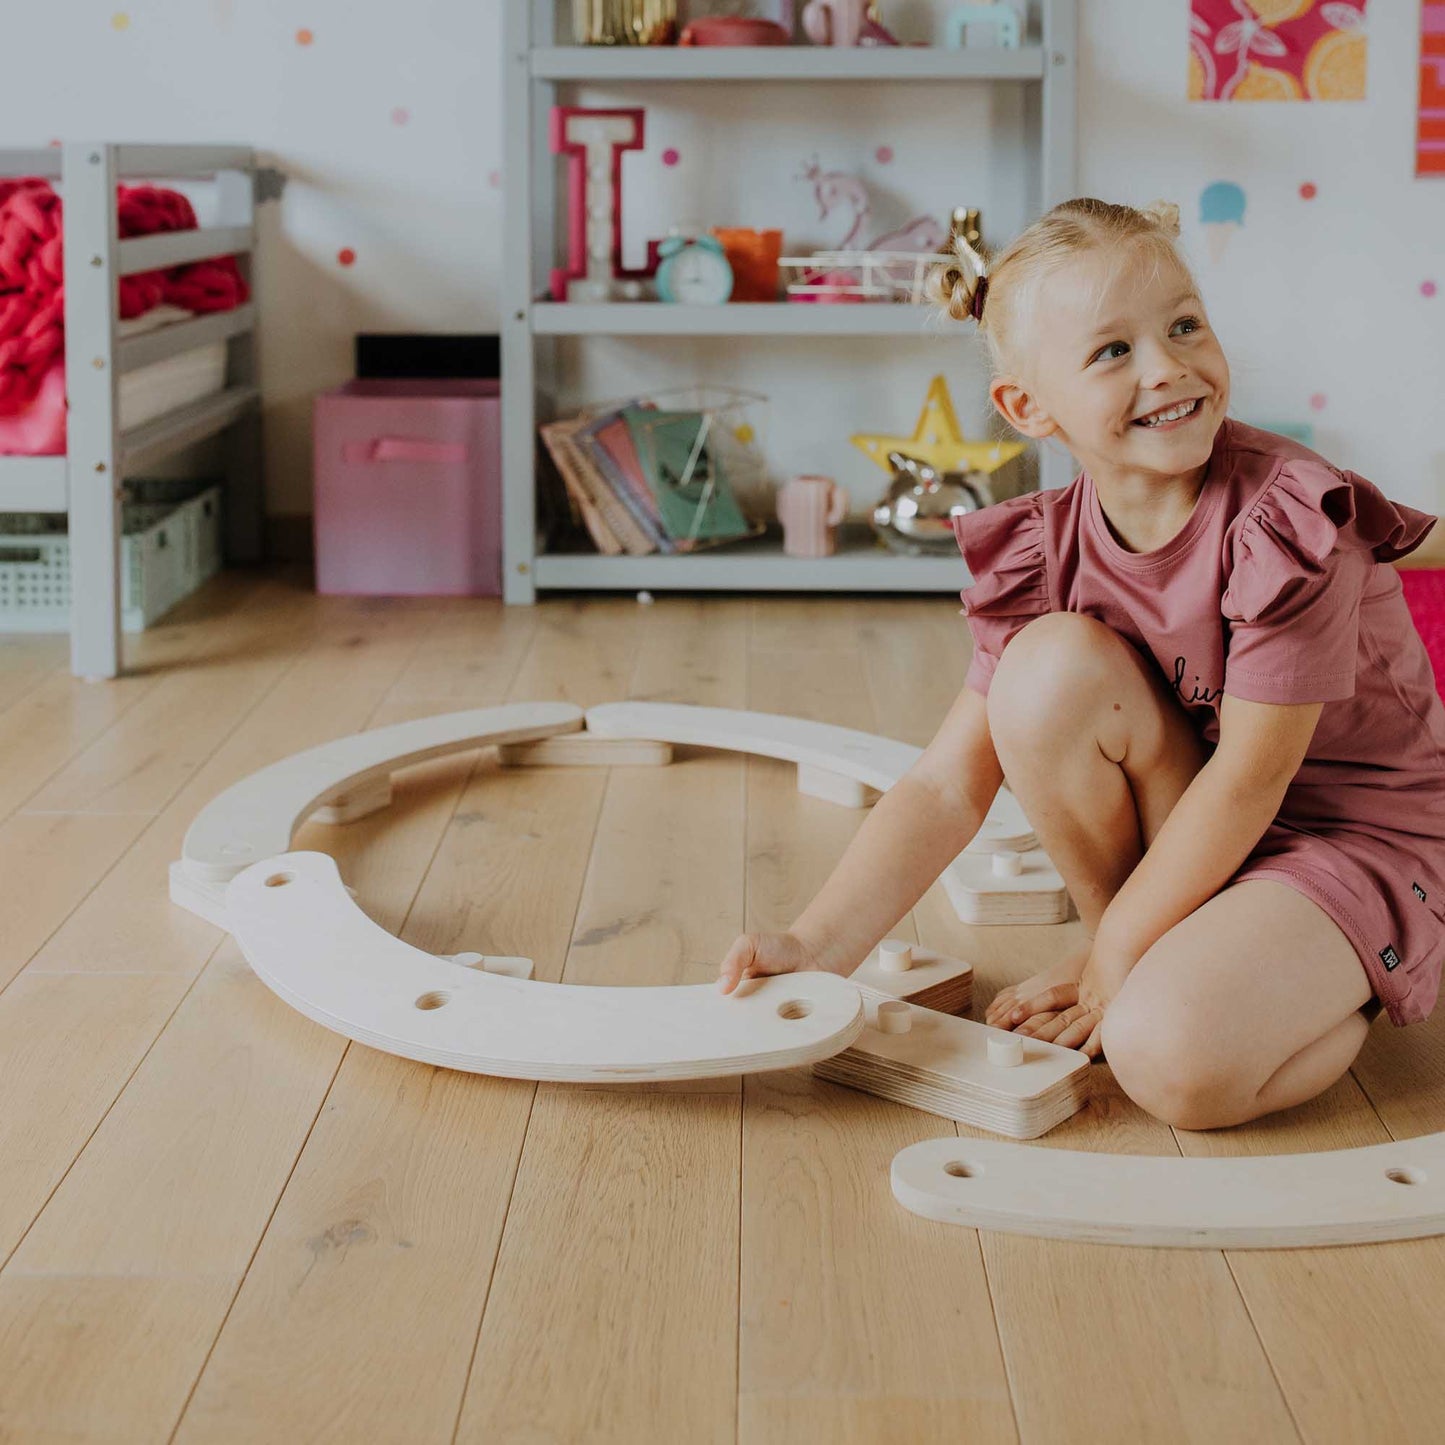 A little girl playing with Round balance beams in a room.